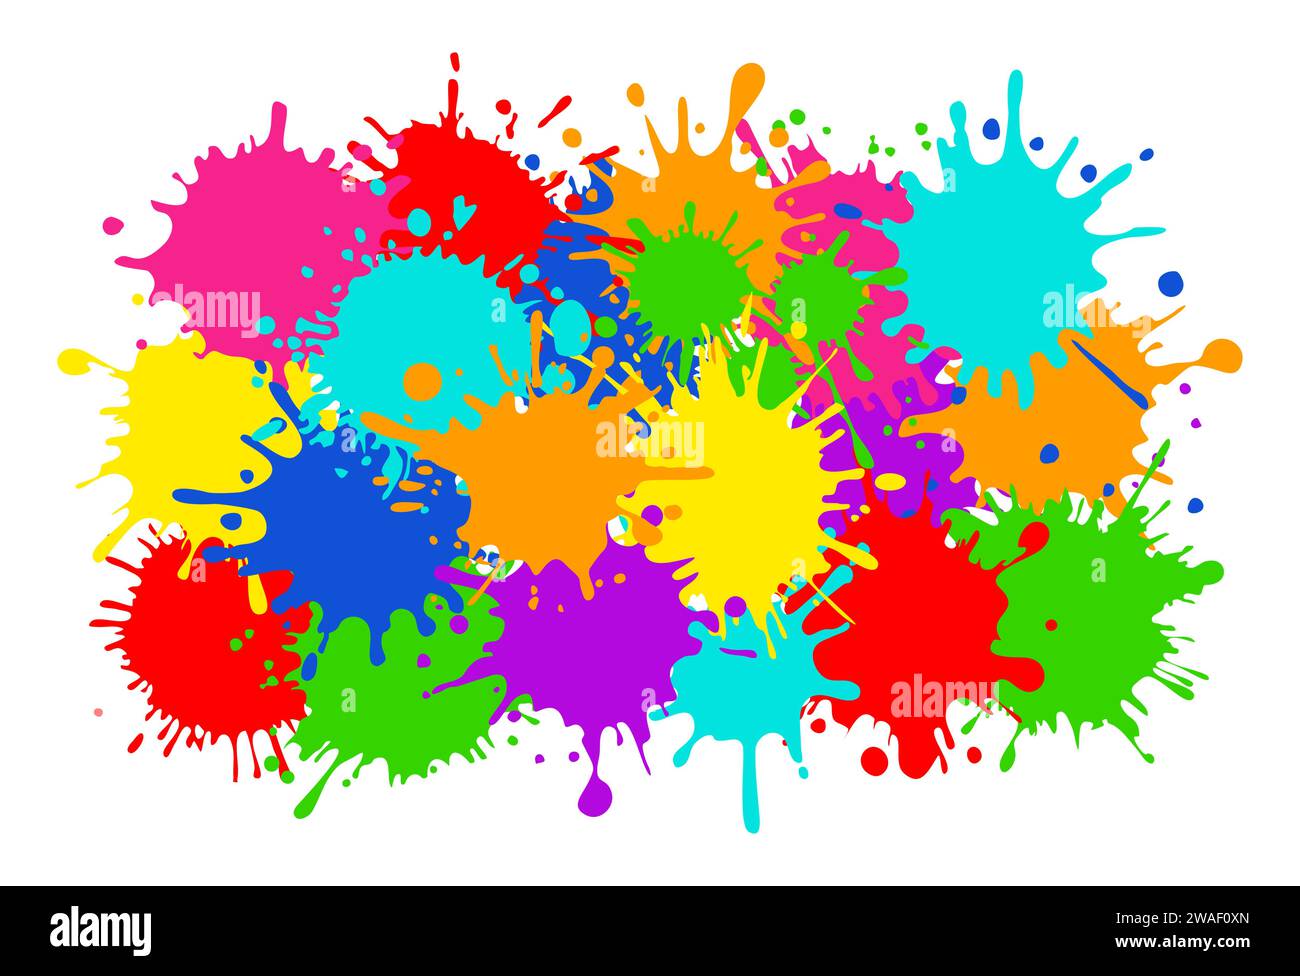 Bright colorful banner. Horizontal banner with colorful paint spots and splashes. Colorful blots, multicolored splash spray paints. Vector Stock Vector